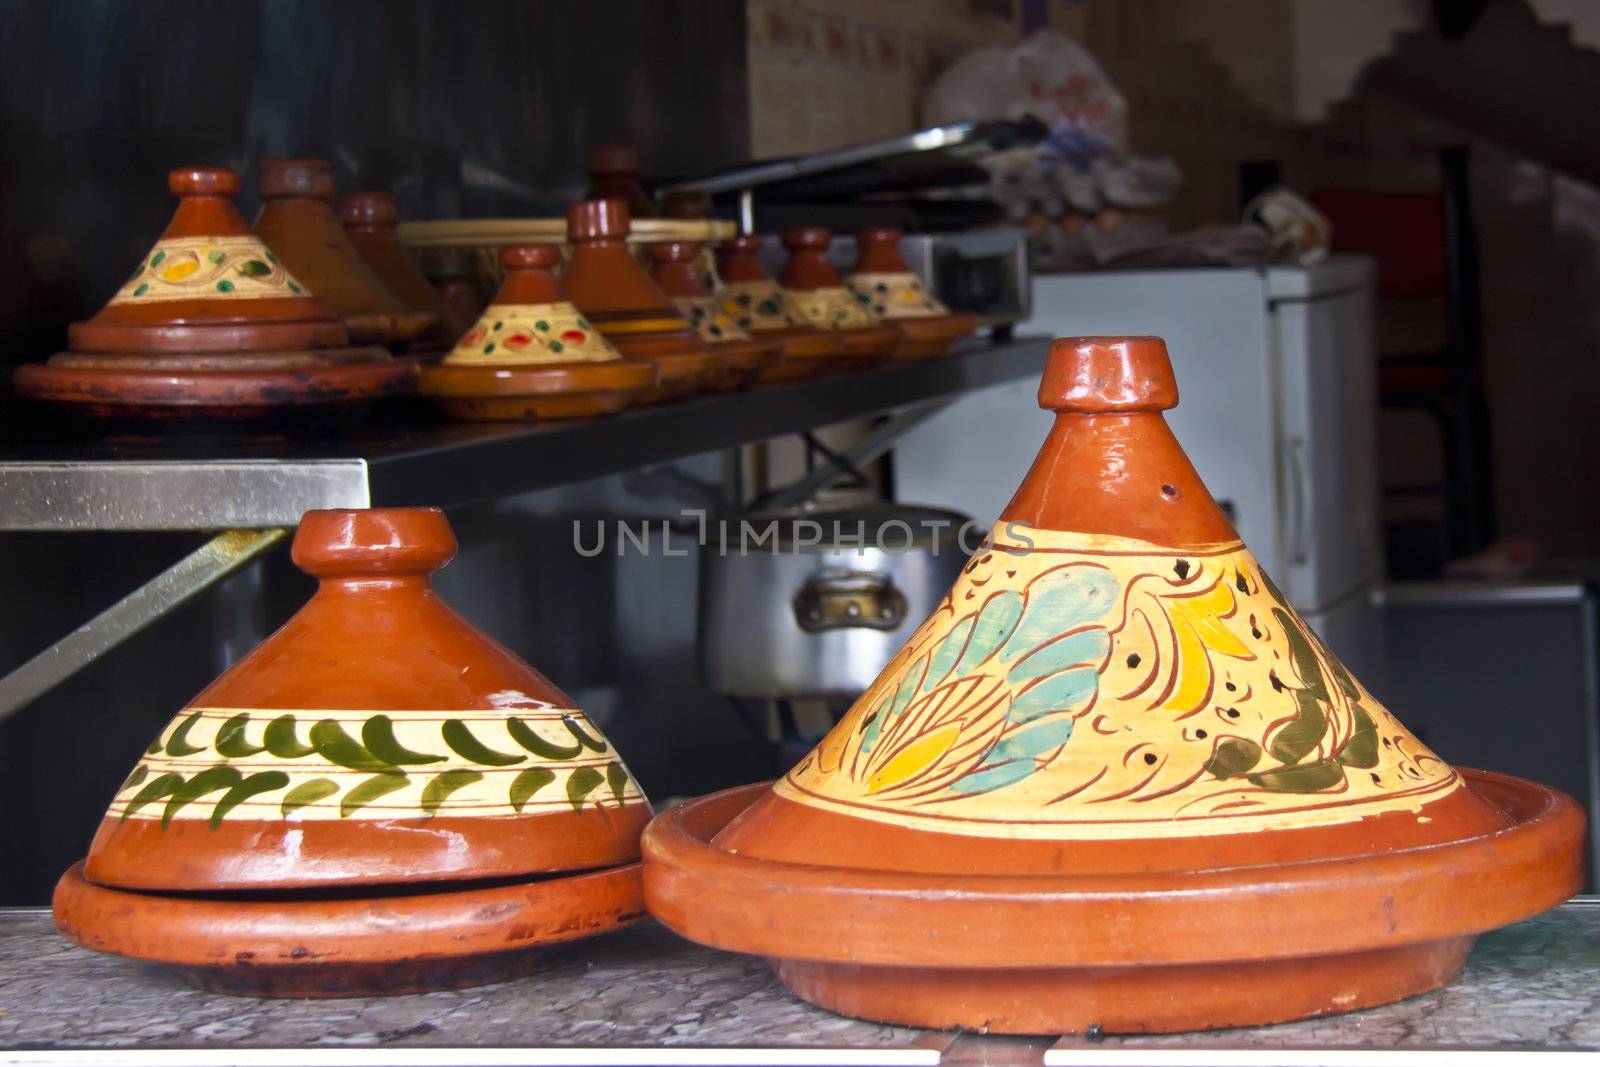 Tagine - traditional maroccan meal, cooked and served in a special ceramic pot